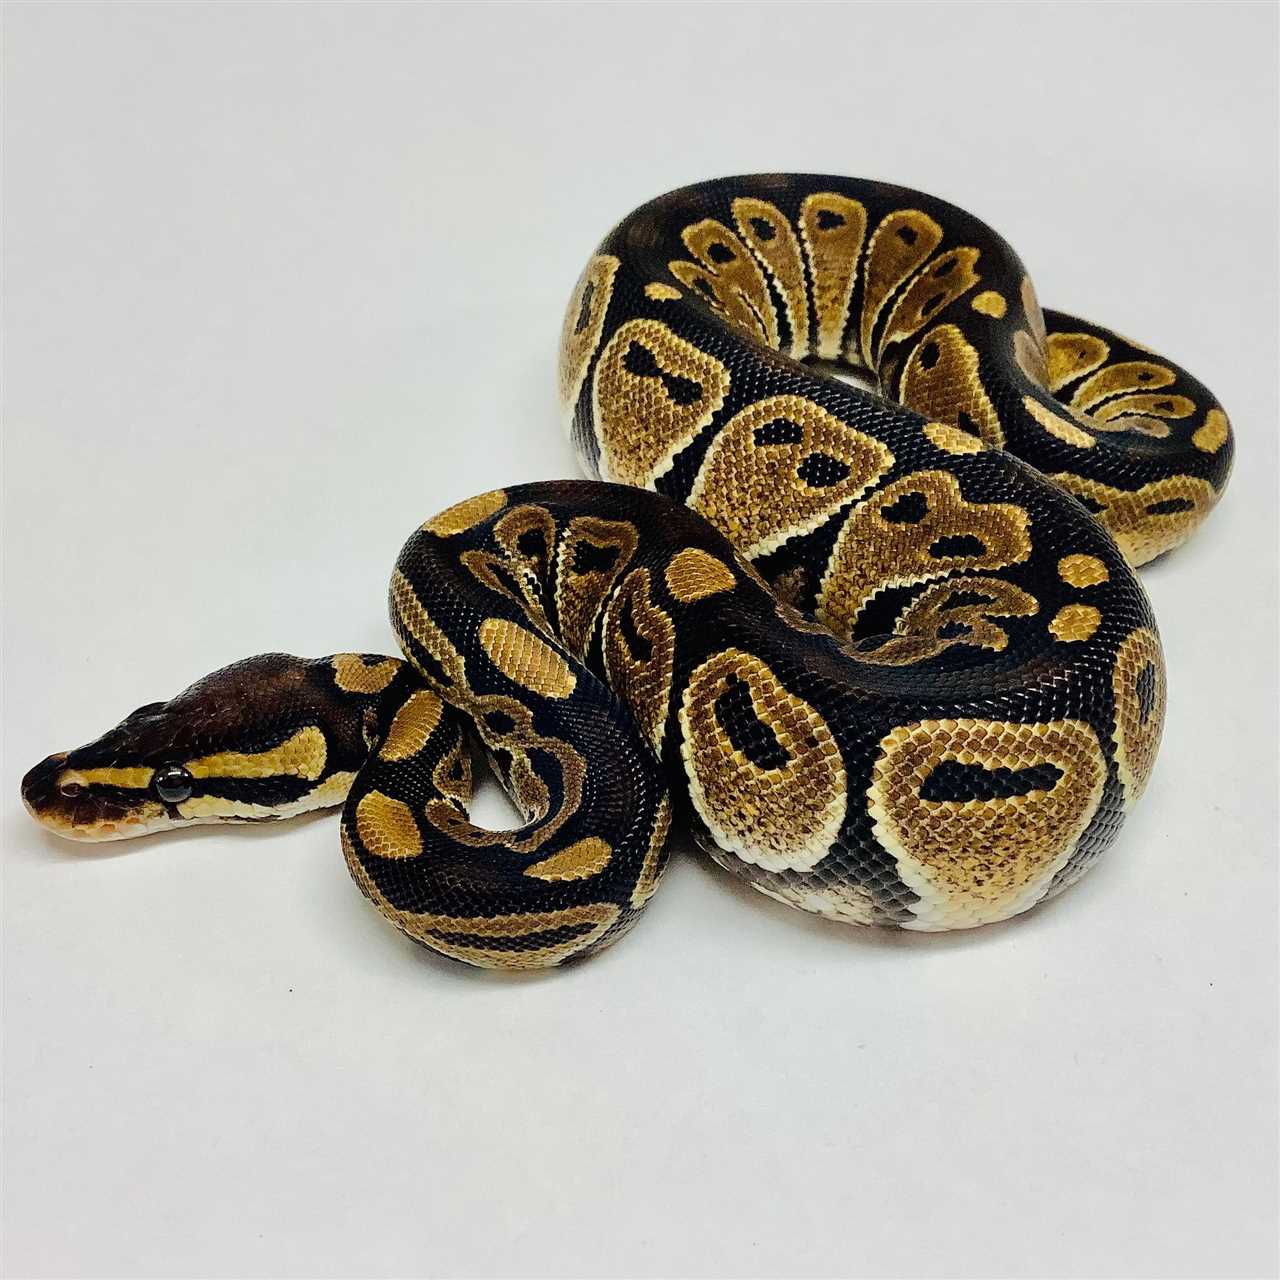 Adding a Russo Ball Python to Your Collection